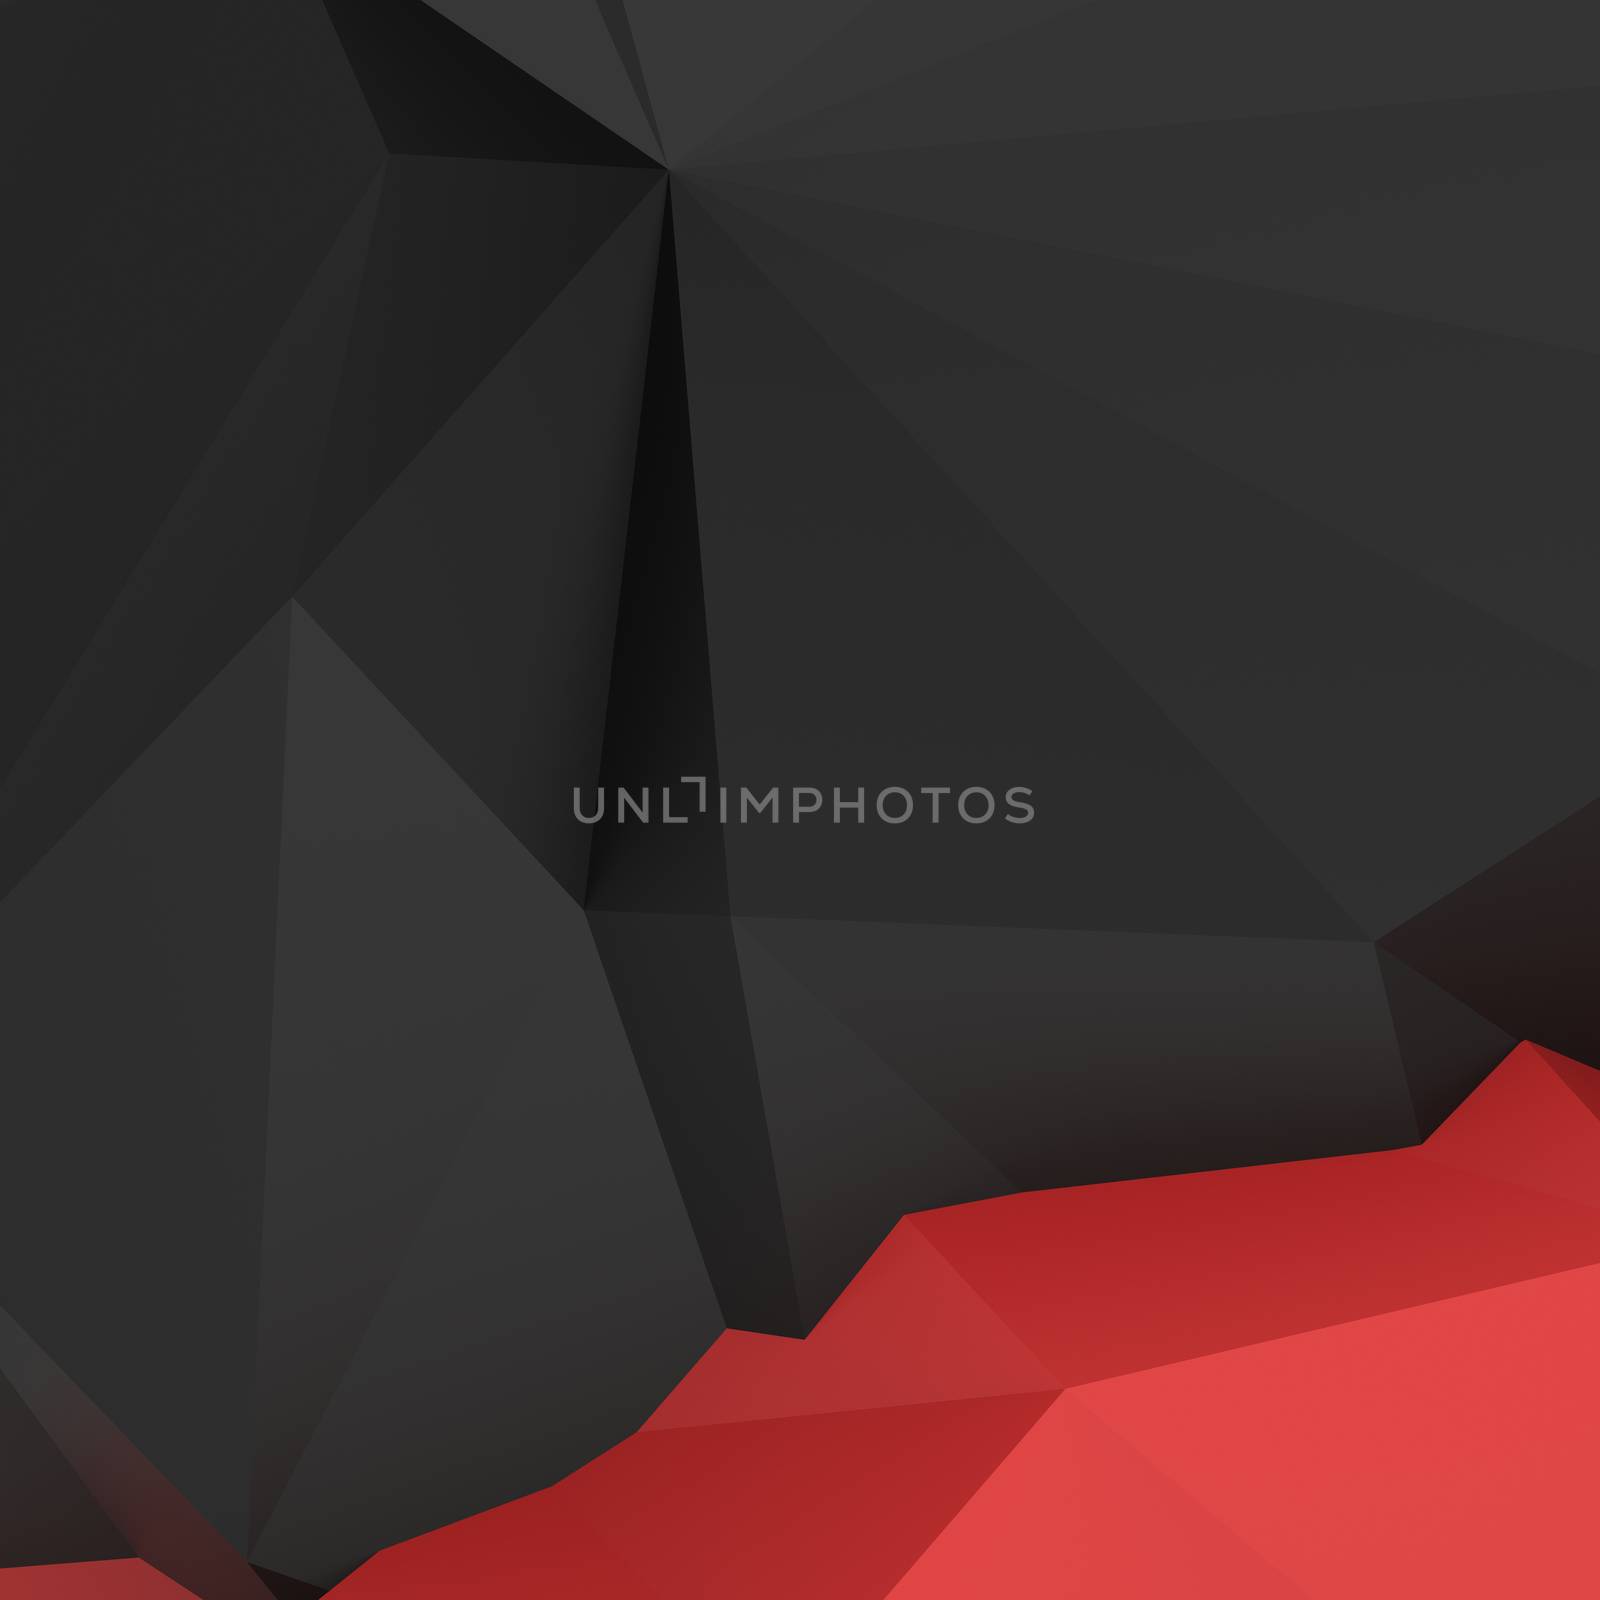 Abstract low poly geometric background by everythingpossible